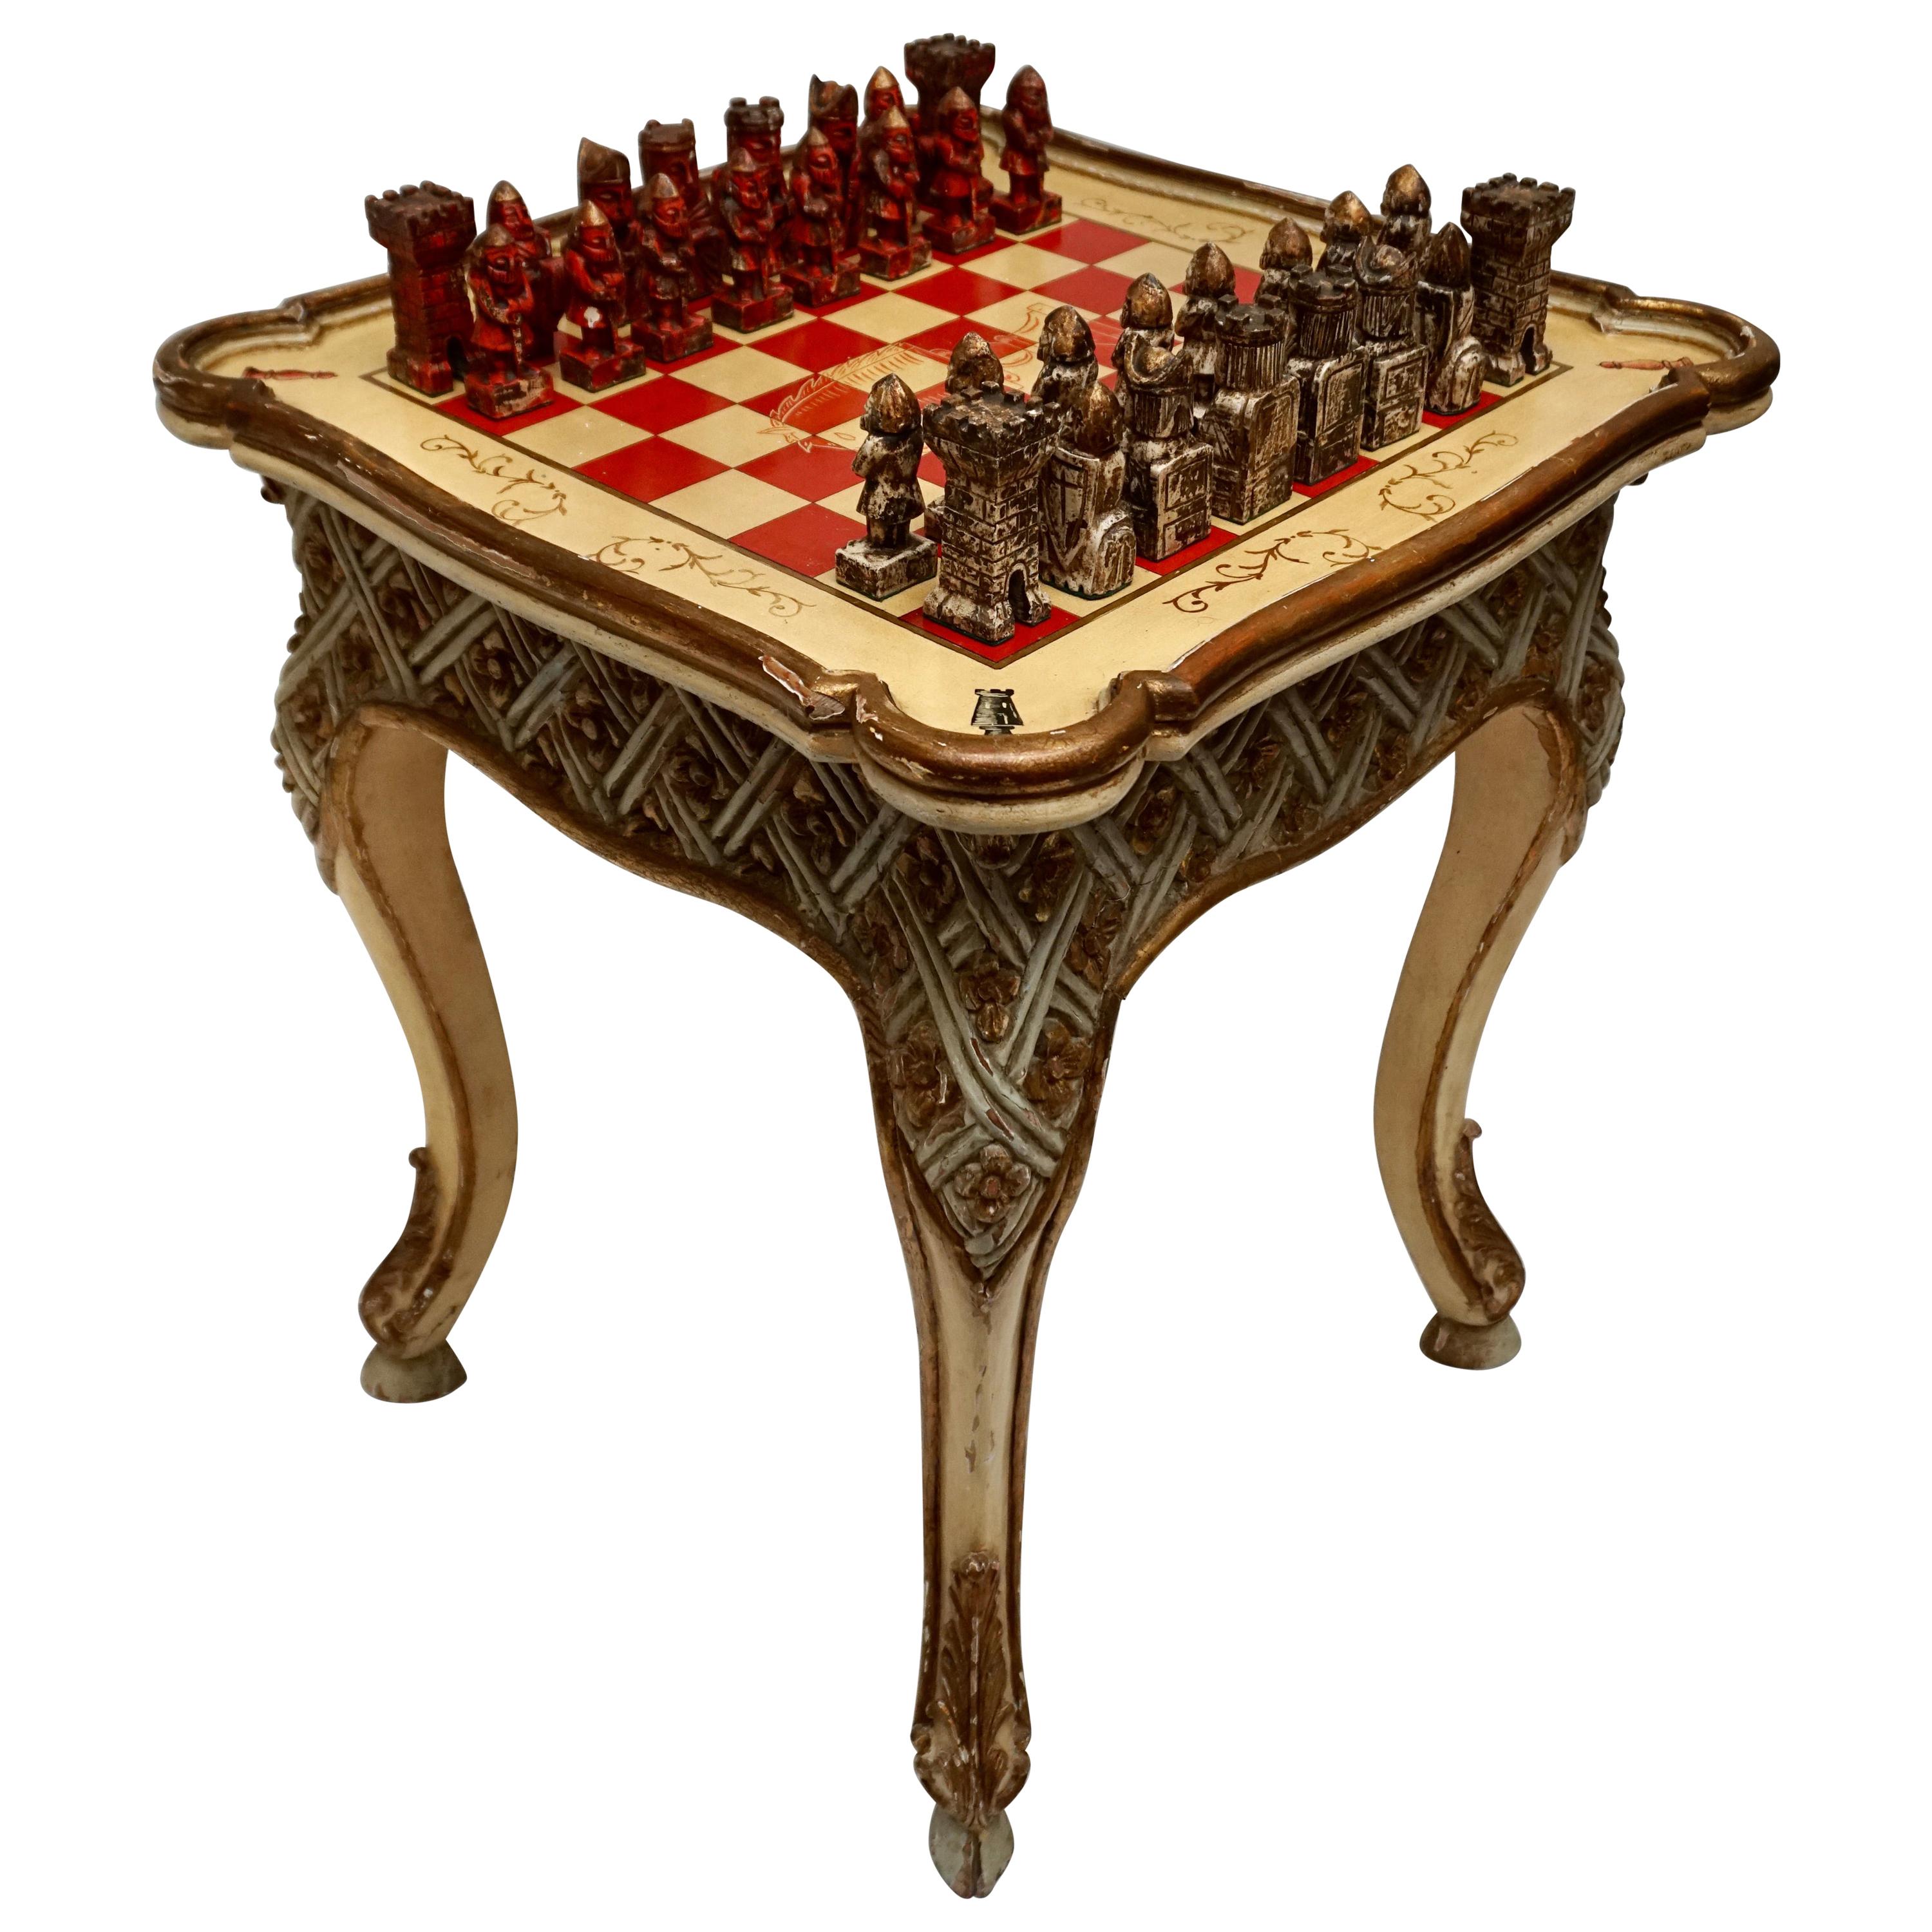 Games Chess Set of Handcrafted and Painted Wood Pieces with Table and Board